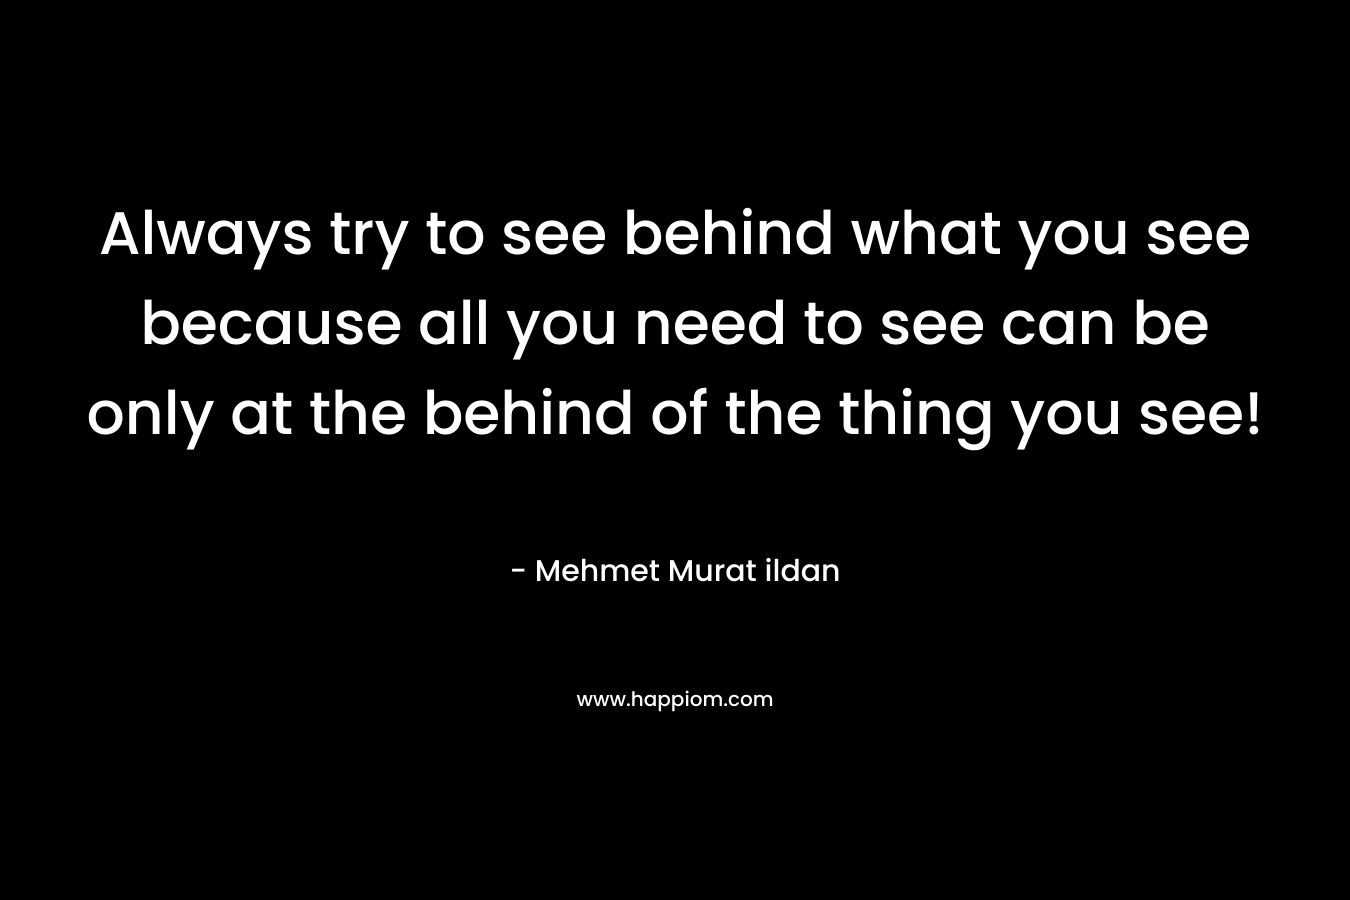 Always try to see behind what you see because all you need to see can be only at the behind of the thing you see!